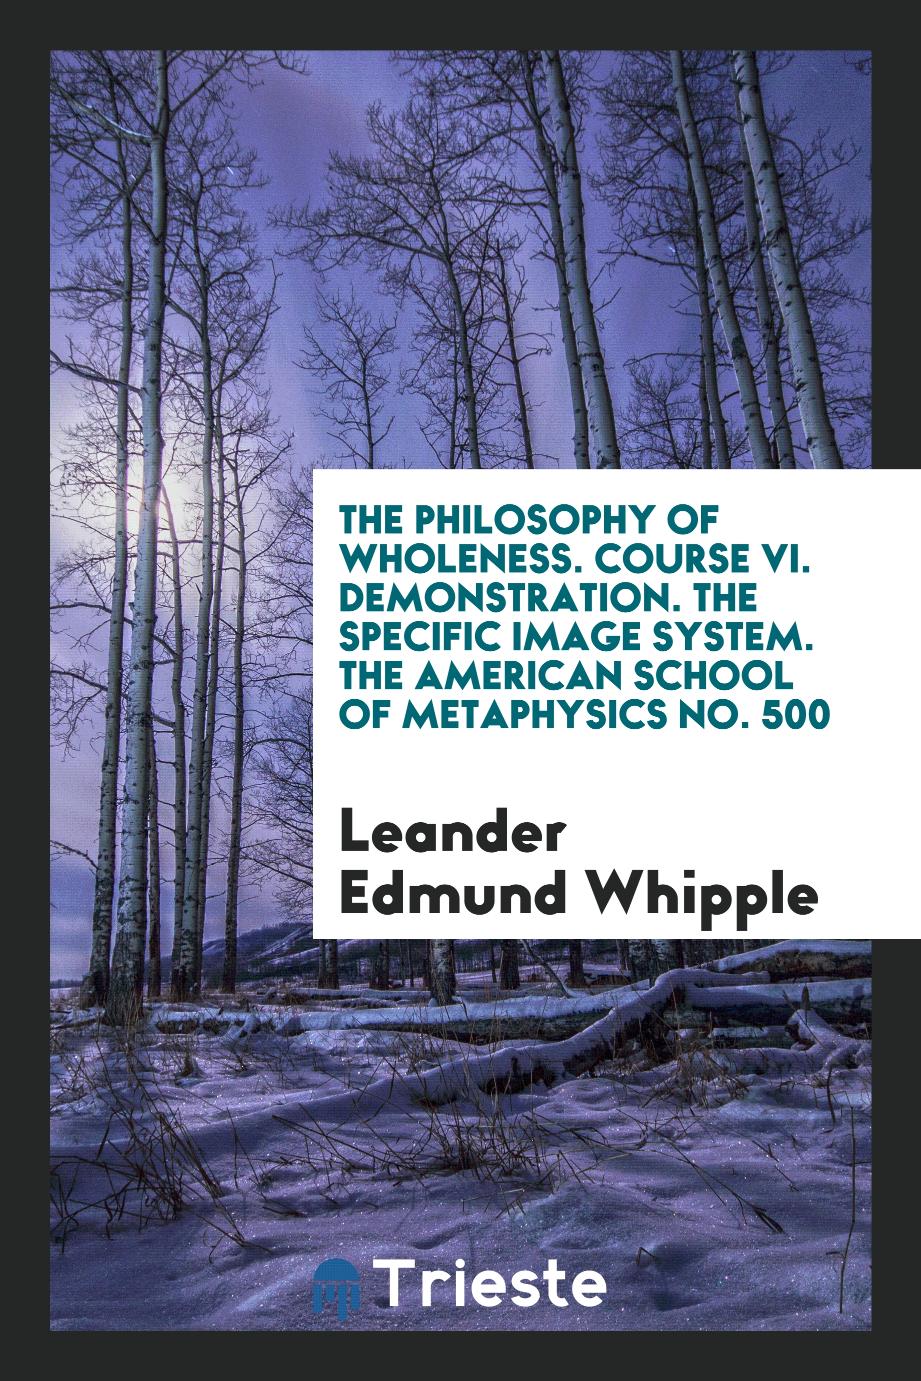 The Philosophy of Wholeness. Course VI. Demonstration. The Specific Image System. The American School of Metaphysics No. 500